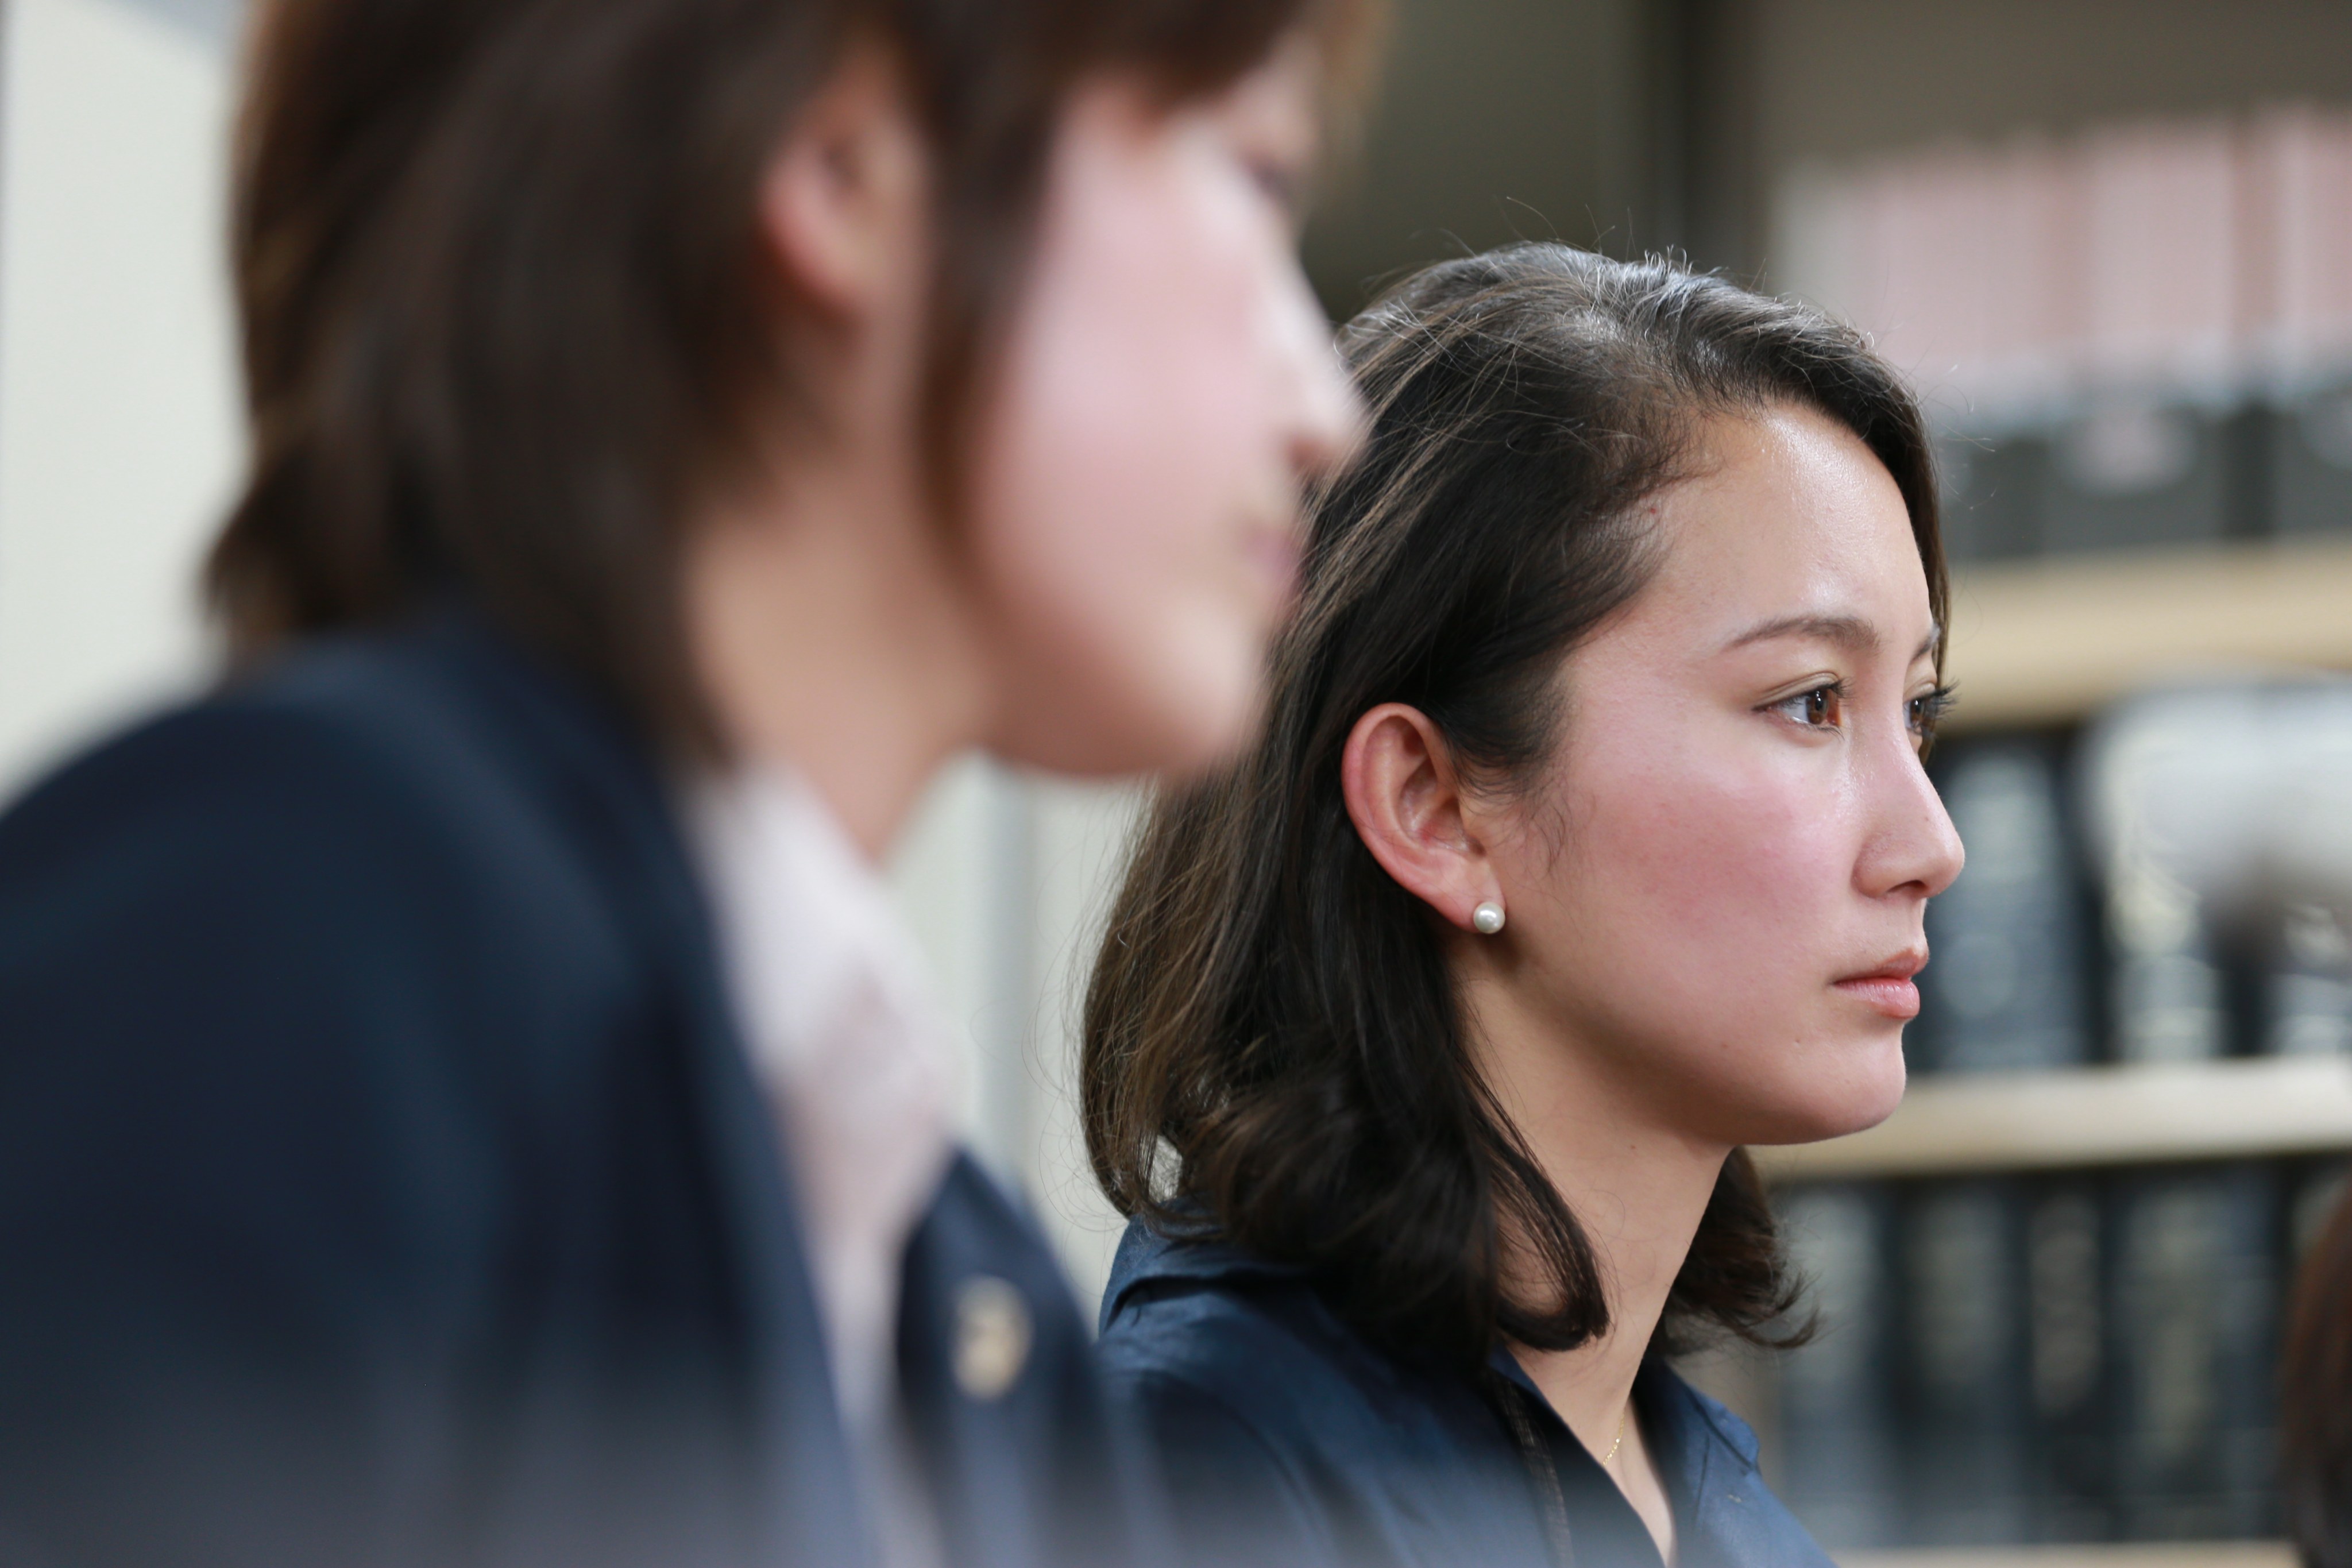 Japanese journalist Shiori Ito (right) in a still from Black Box Diaries, her documentary of her sexual assault by a prominent TV journalist and her five-year struggle to bring him to justice that pushed the #MeToo movement in Japan. Photo: HKIFF